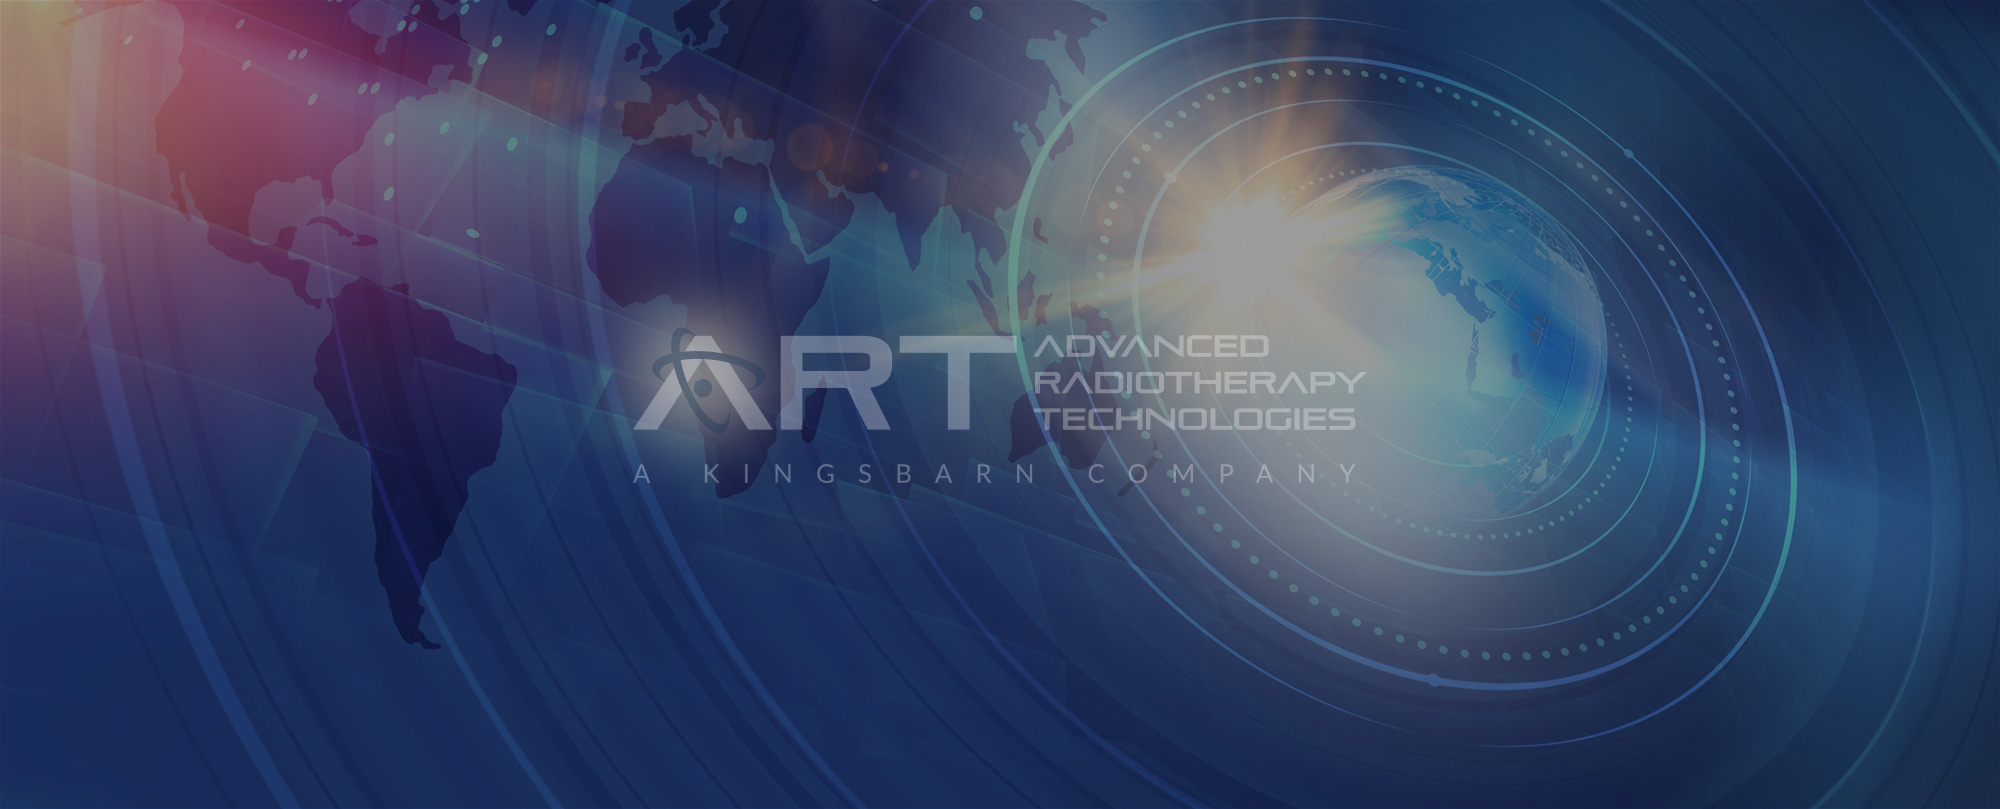 ART Health Announces Plans for a State-of-the-Art Radiation Treatment Center in Las Vegas, Nevada